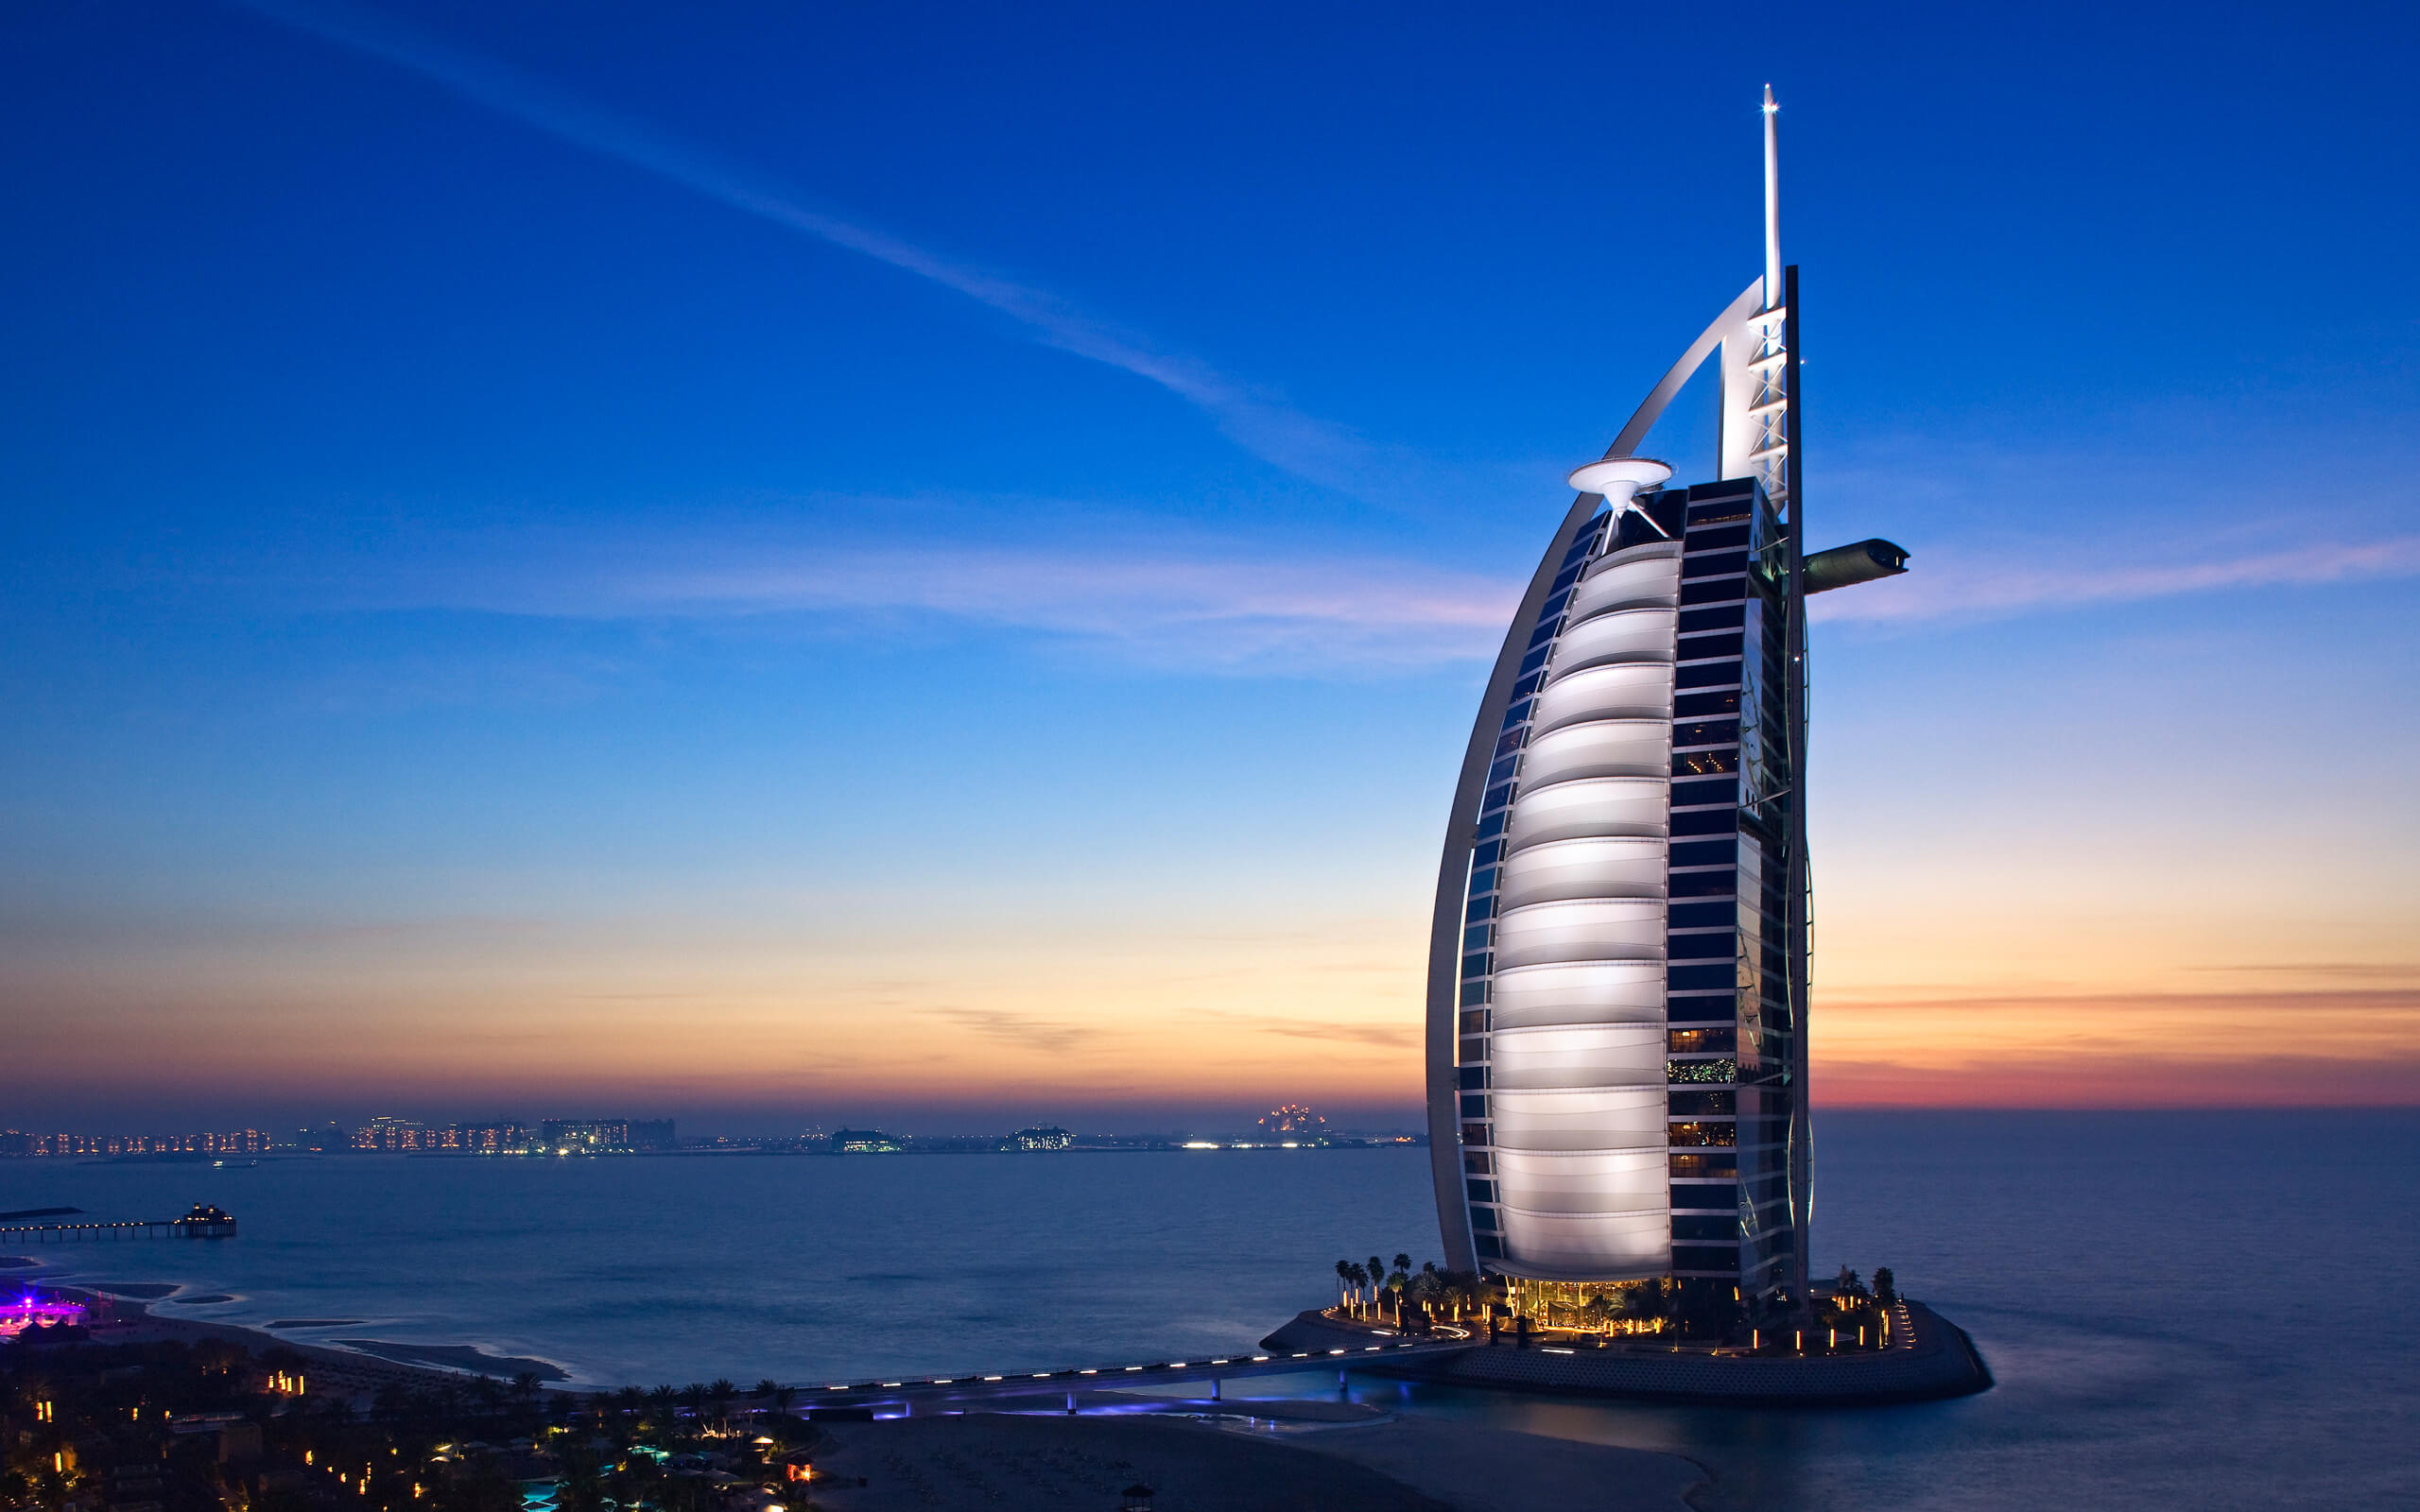 Winter 4 Star Dubai Holiday Travel & Tour Package